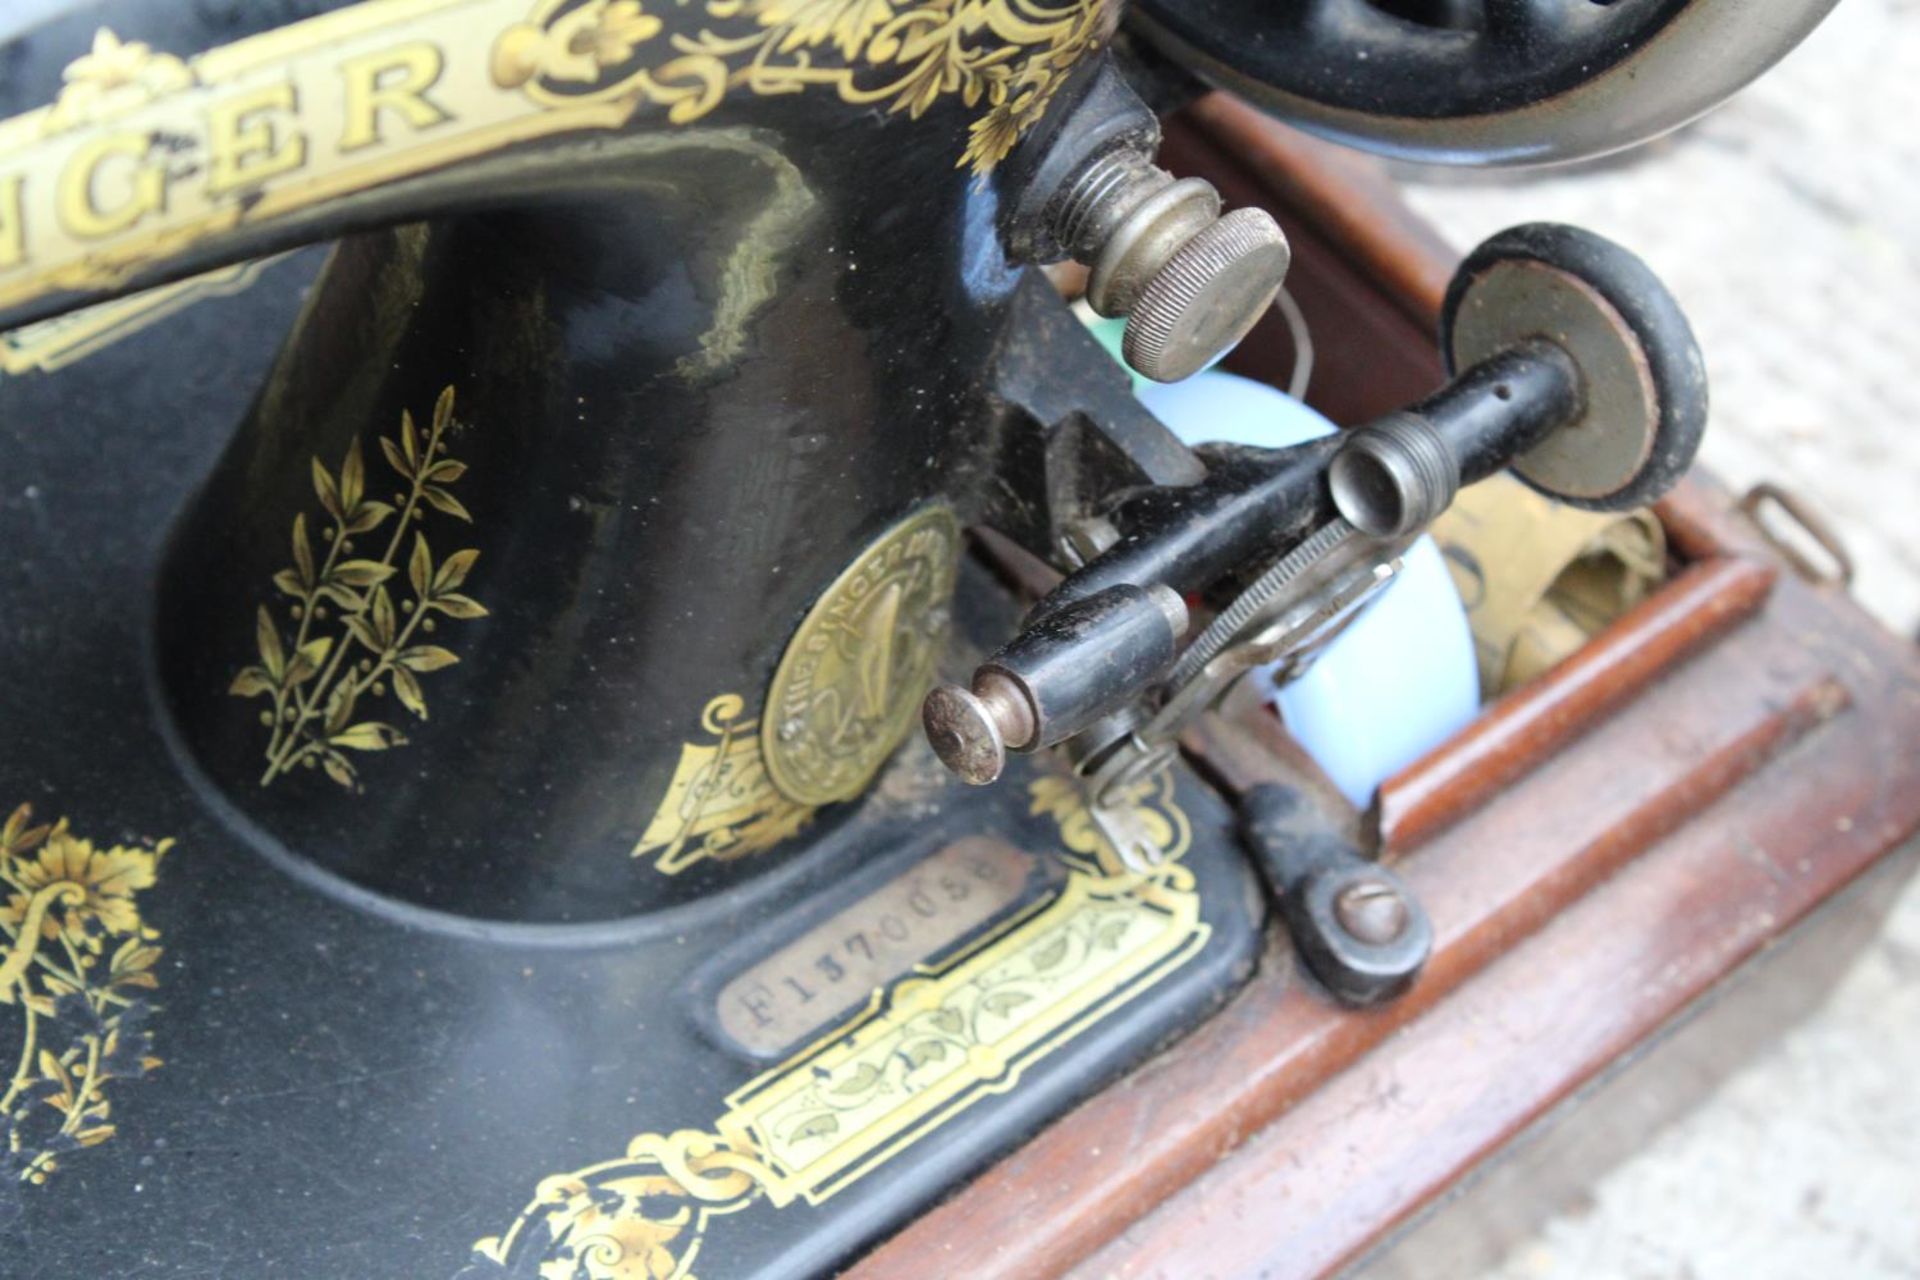 A VINTAGE SINGER SEWING MACHINE WITH WOODEN CARRY CASE - Image 4 of 4